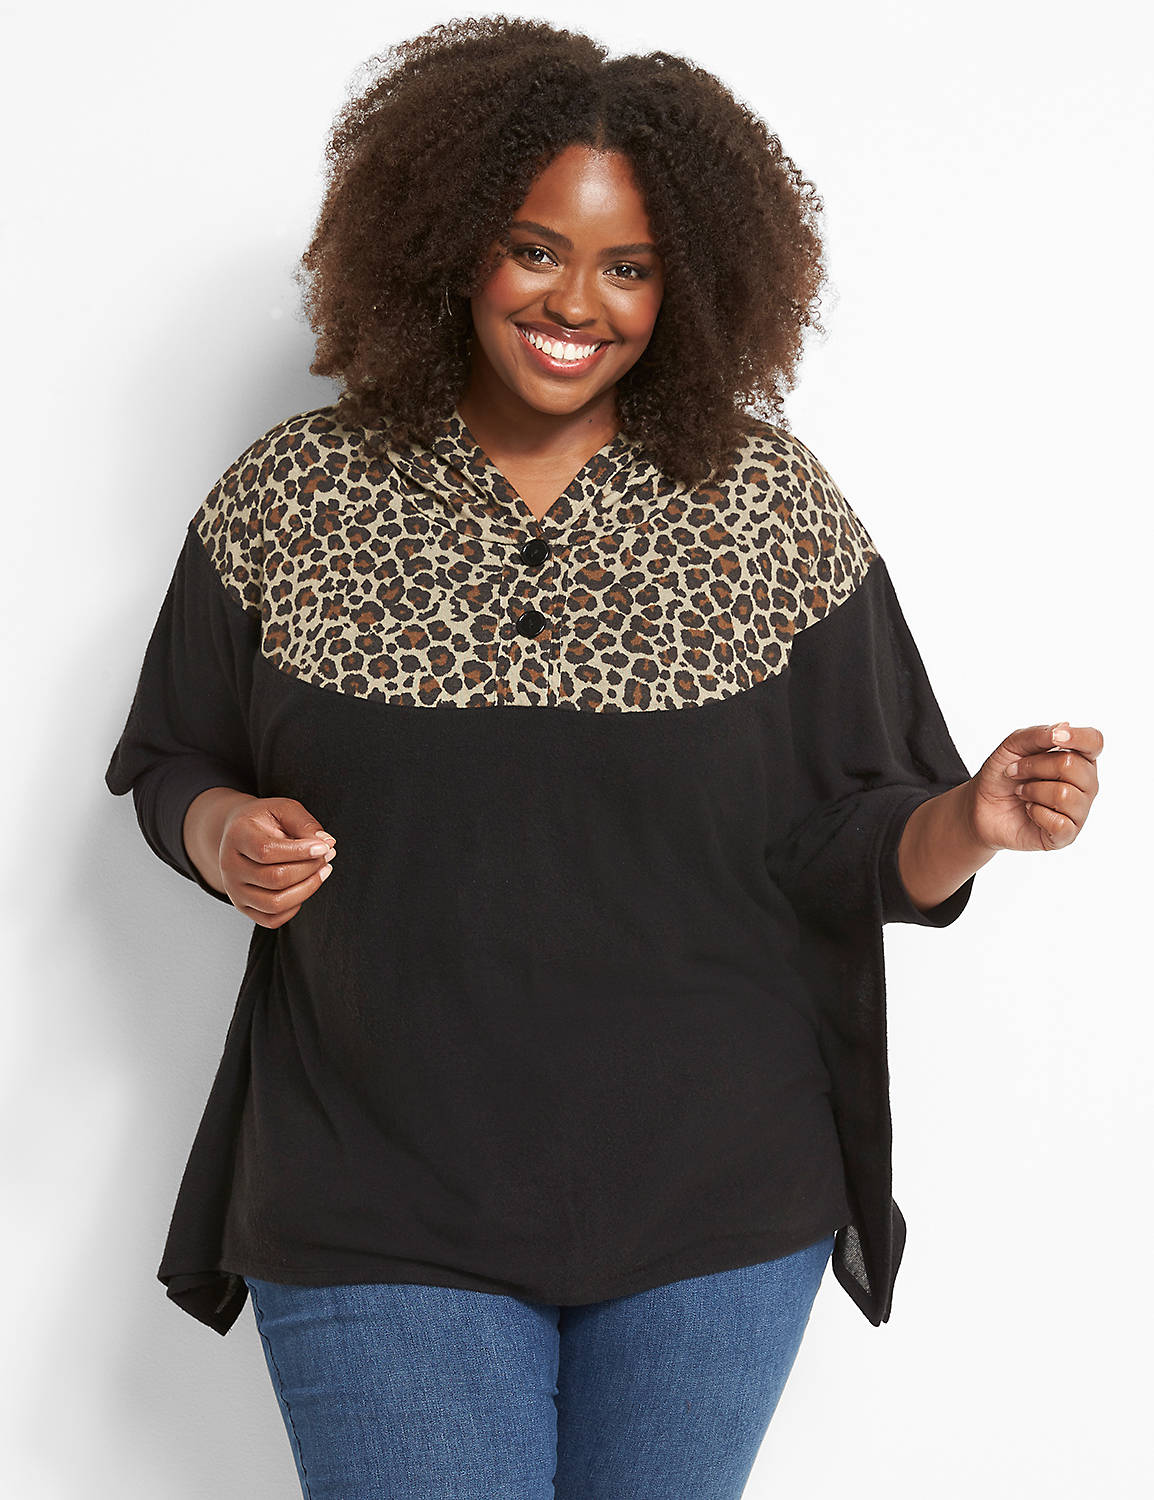 Poncho Hoodie With Leopard Mix 1124581:Ascena Black:10/12 Product Image 1